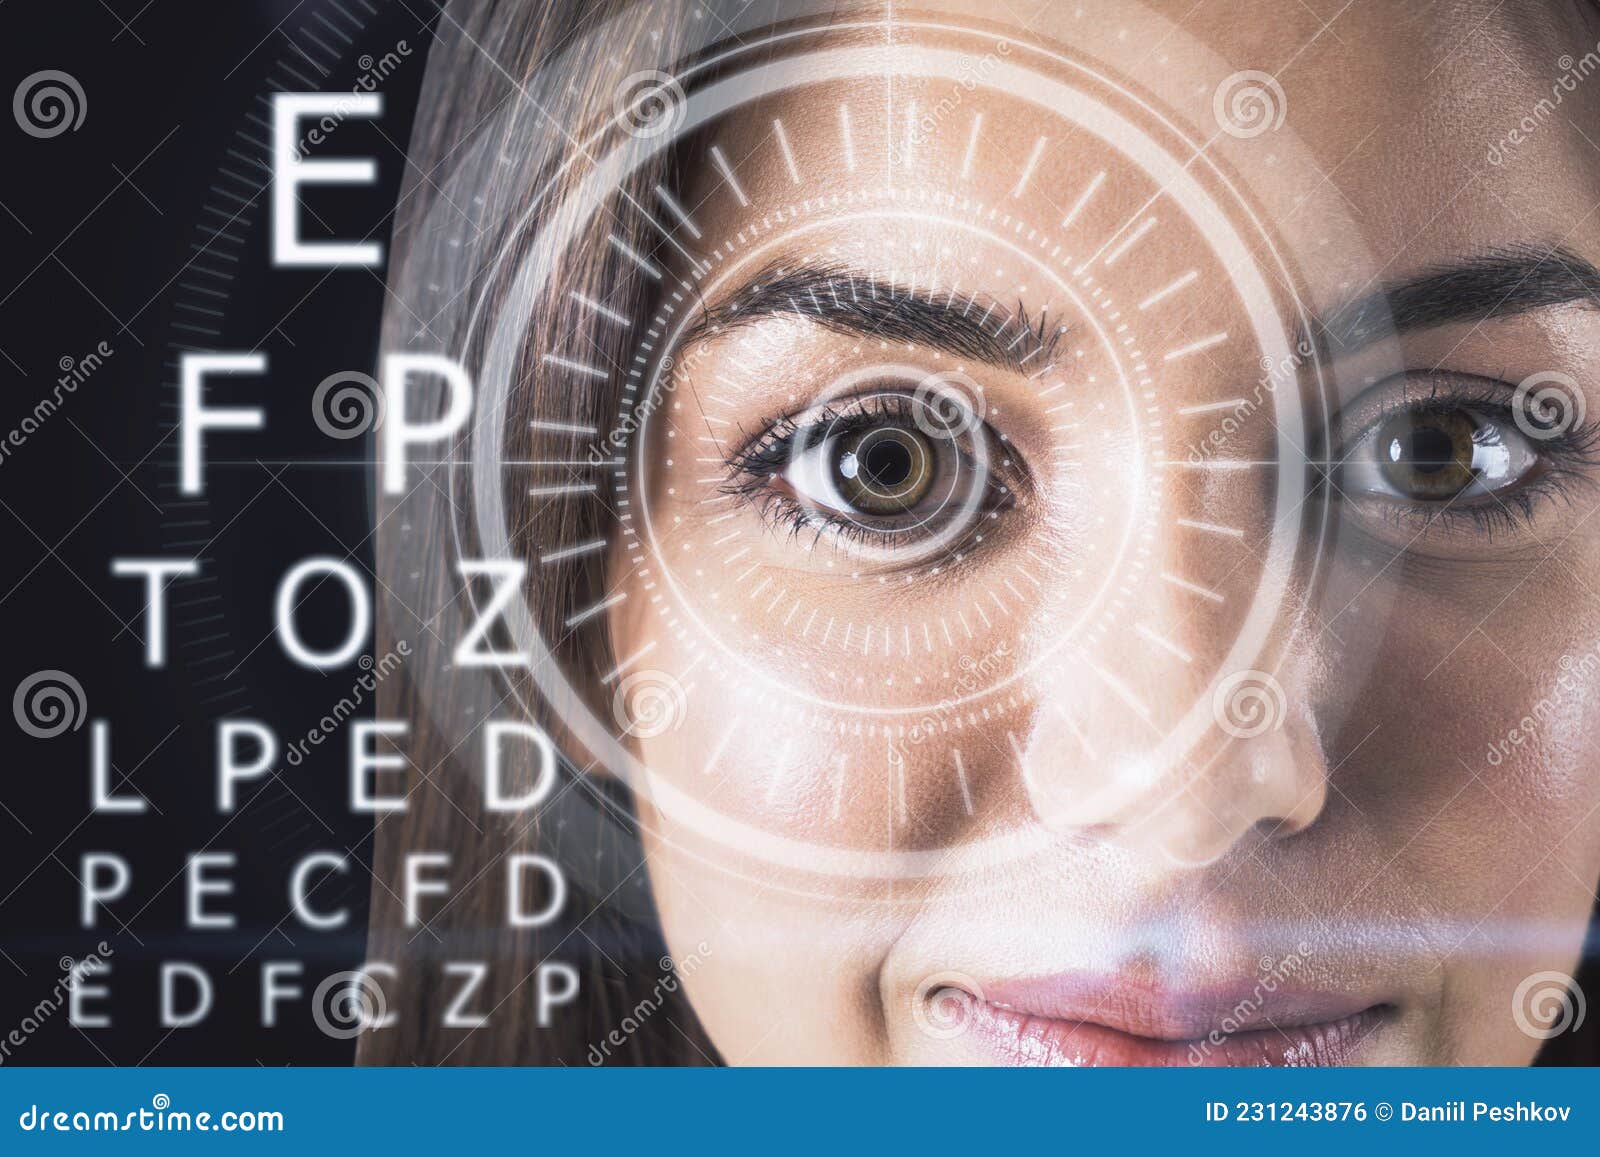 Abstract Eyesight Image with Attractive Happy European Female Portrait,  Digital Eye Lens and Letters on Dark Background. Optical Stock Photo -  Image of futuristic, correction: 231243876